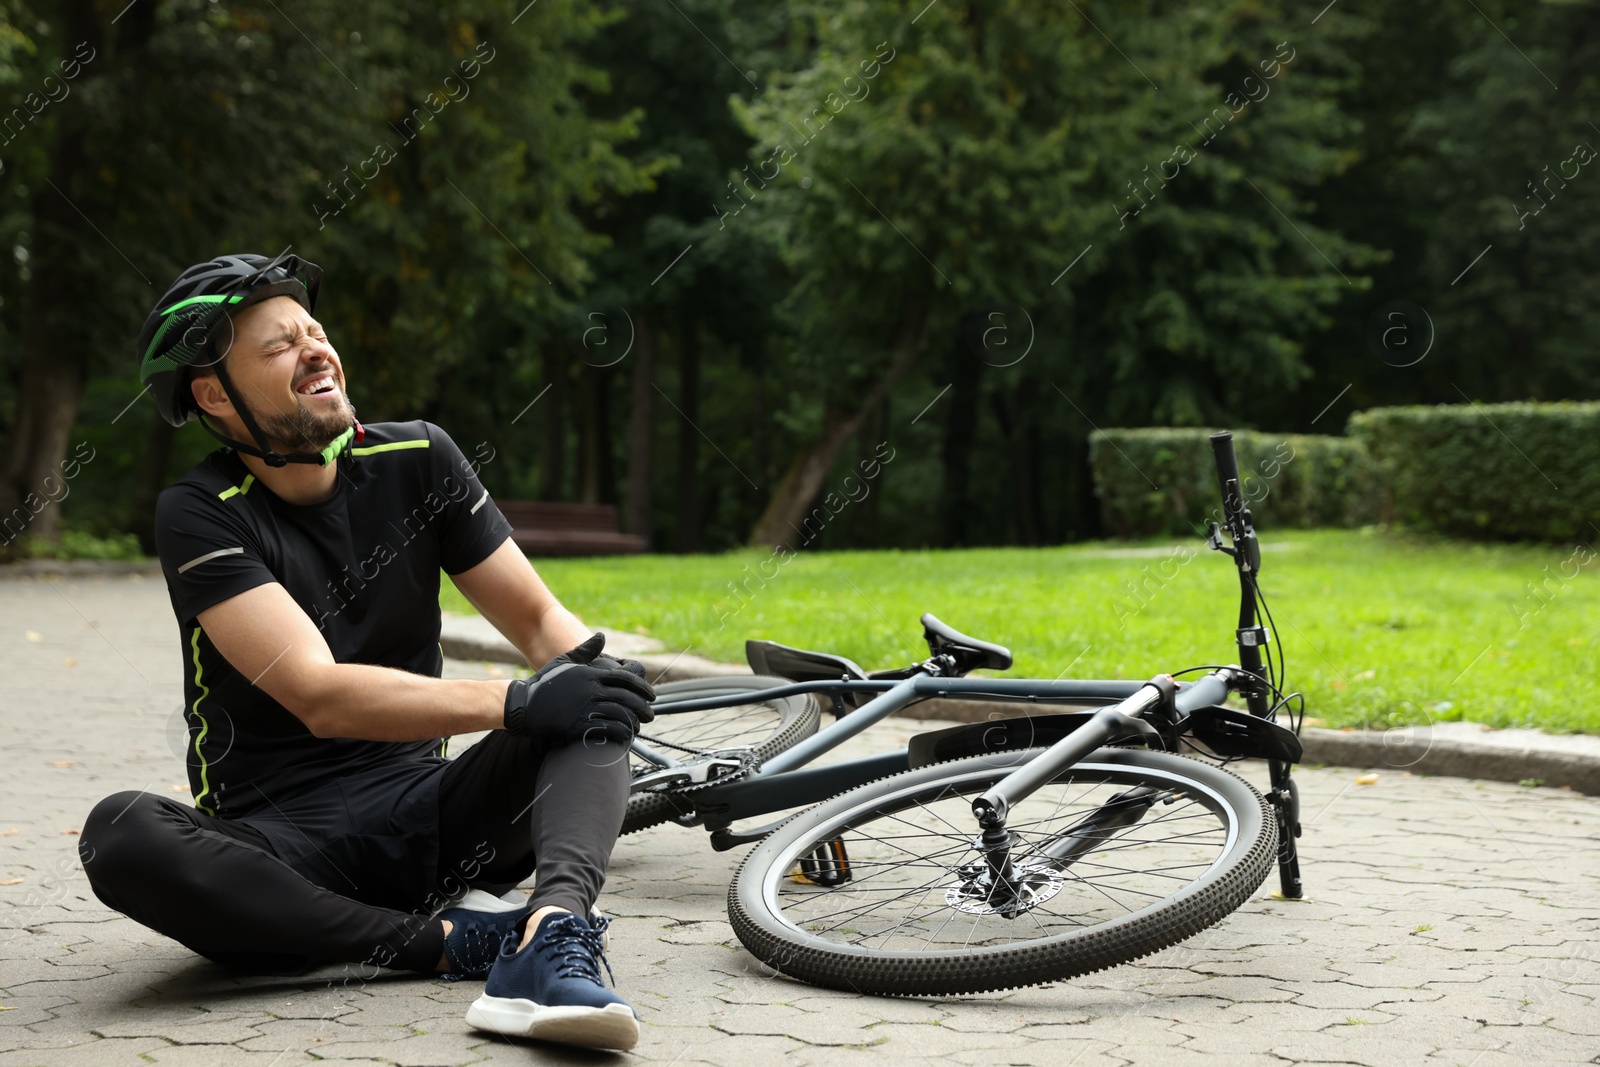 Photo of Man with injured knee near bicycle outdoors